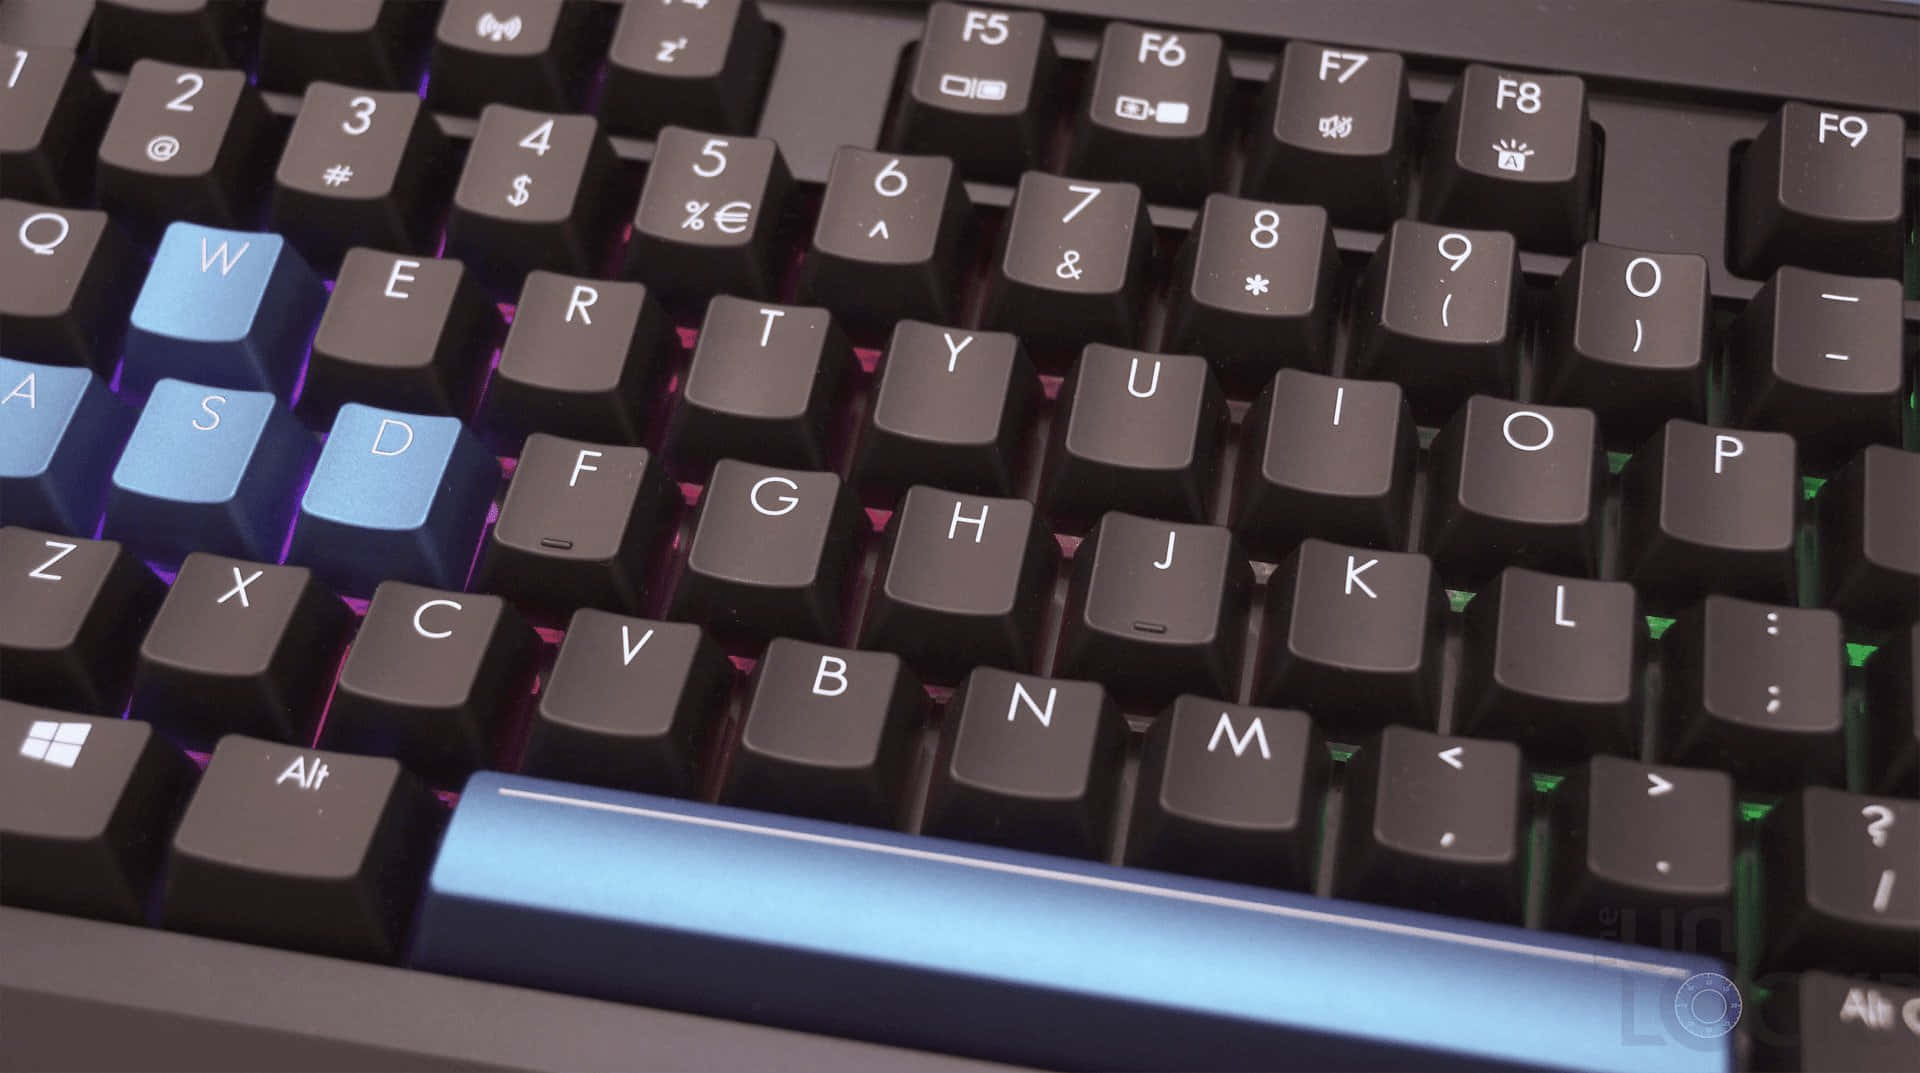 Take your typing speed to the next level with a high-performance keyboard